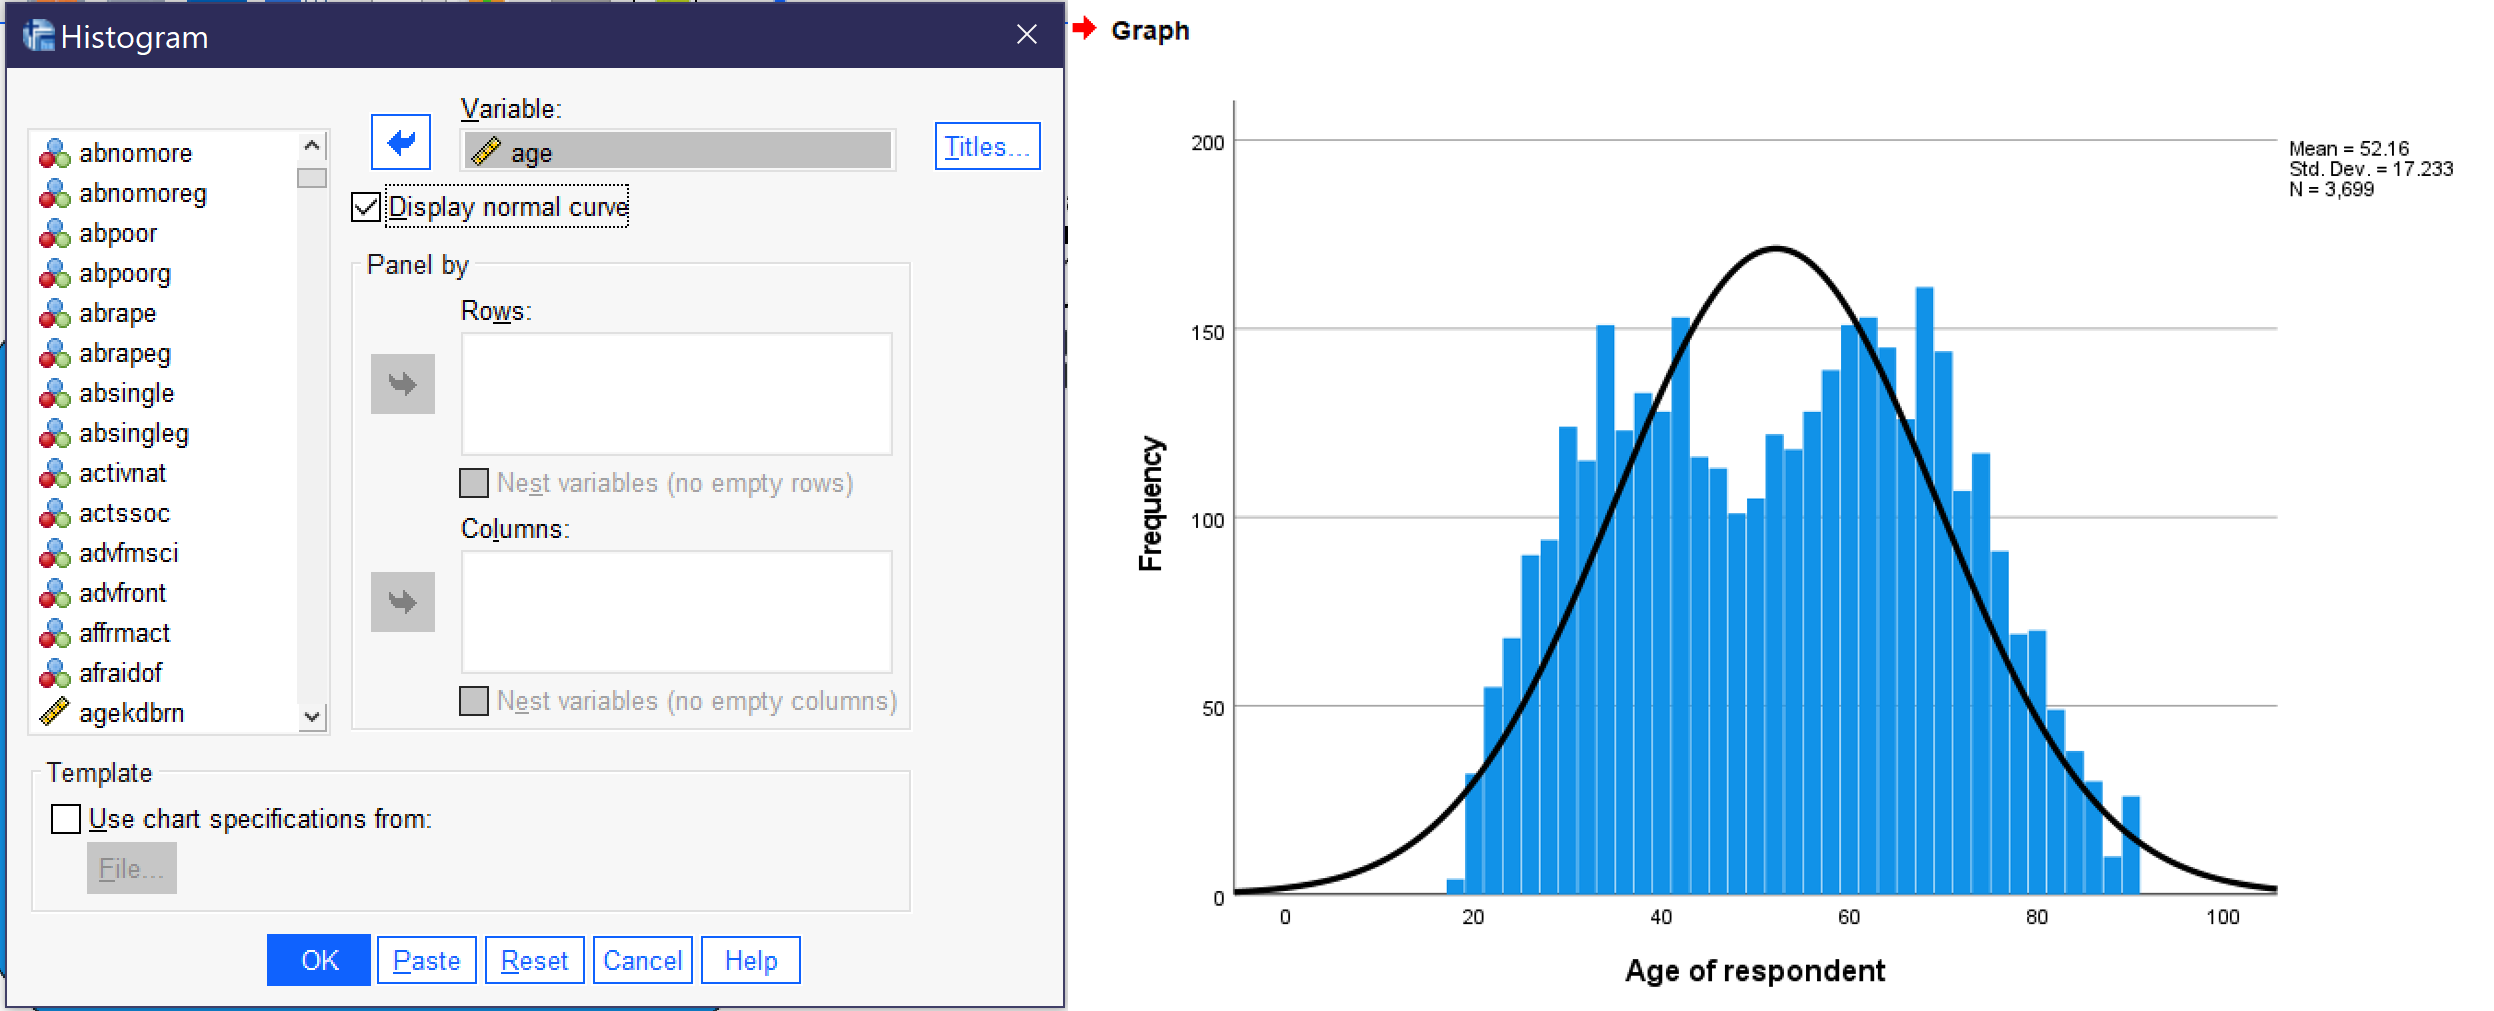 Alt+G, Alt+L, Alt+I selects the histogram dialog. Alt+V goes to the variable box; Alt+D to the show normal curve option. The resulting graph displays mean 52.16, standard deviation 17.233, N 3699 and presents a distribution with few young and old people, higher numbers of people in the 30s-40s and 60s-70s and lower numbers of people around 50.